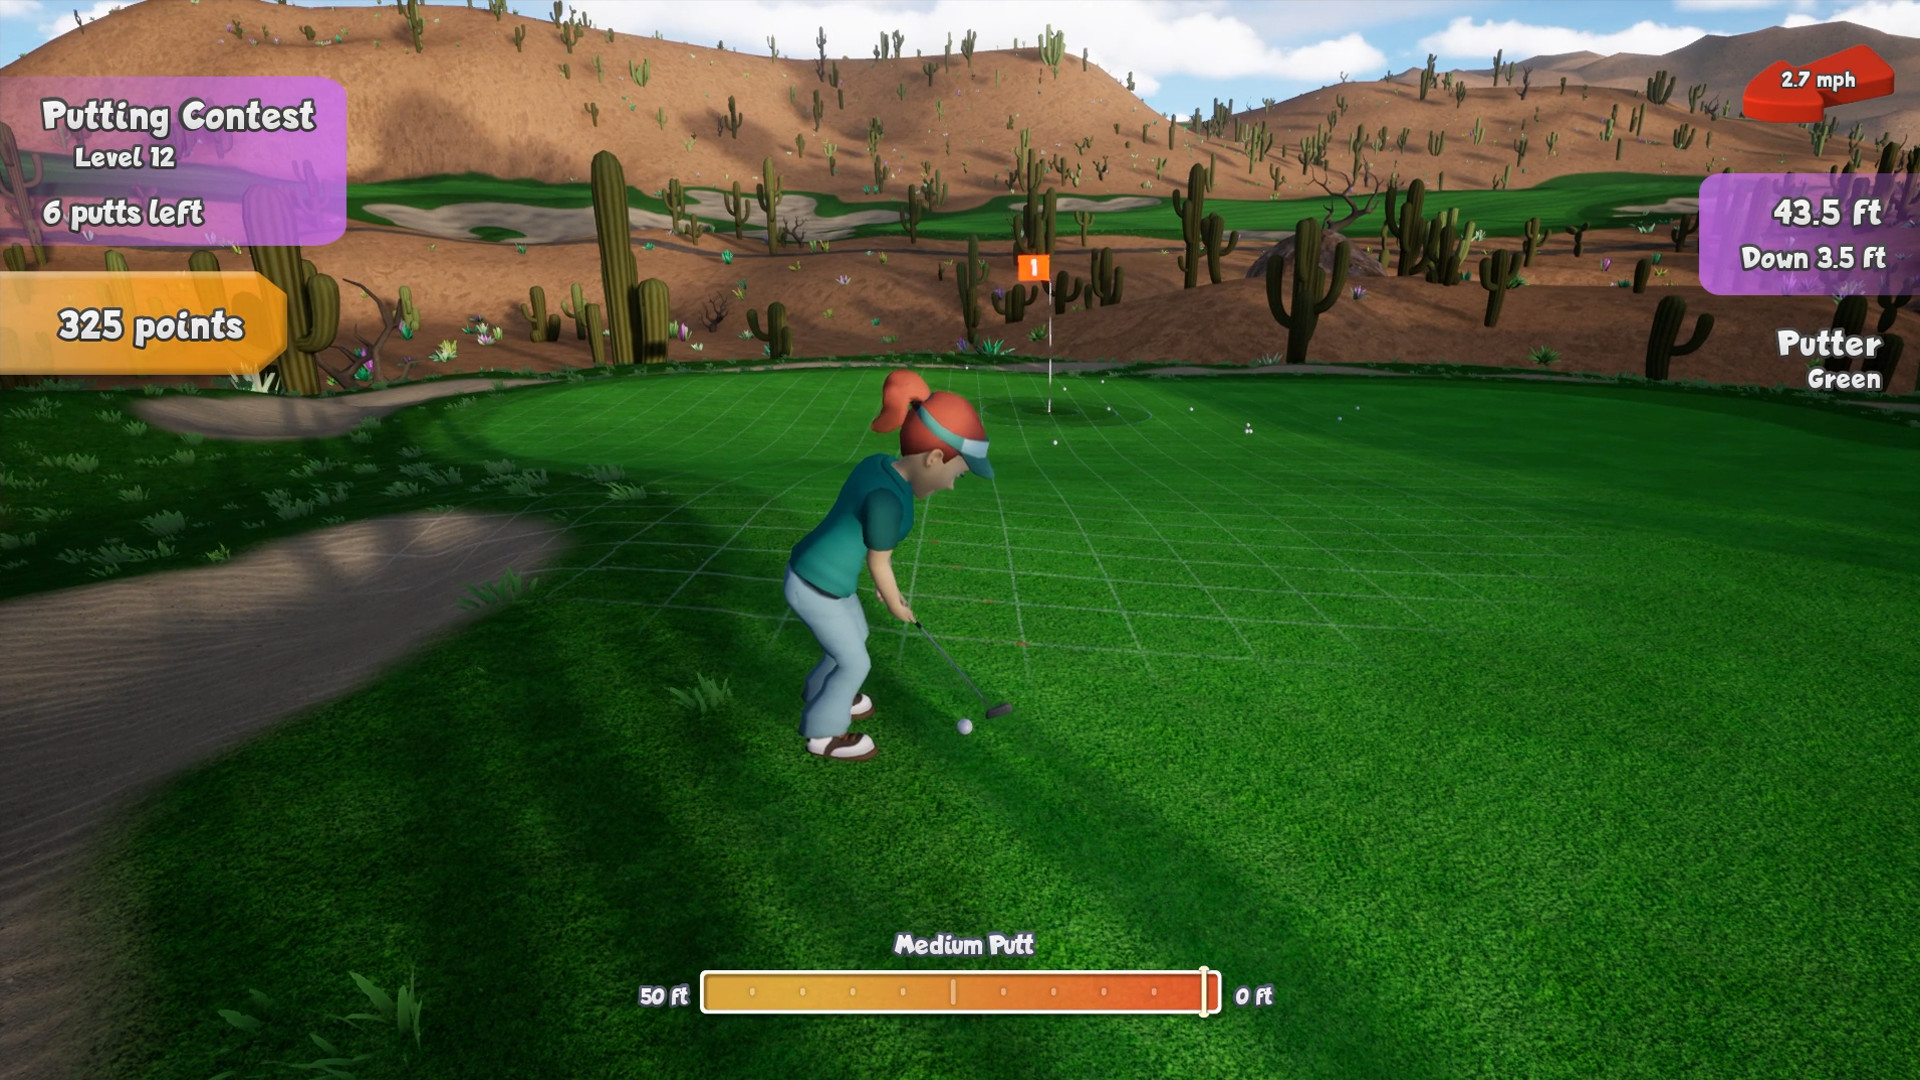 That Golf Game on Steam